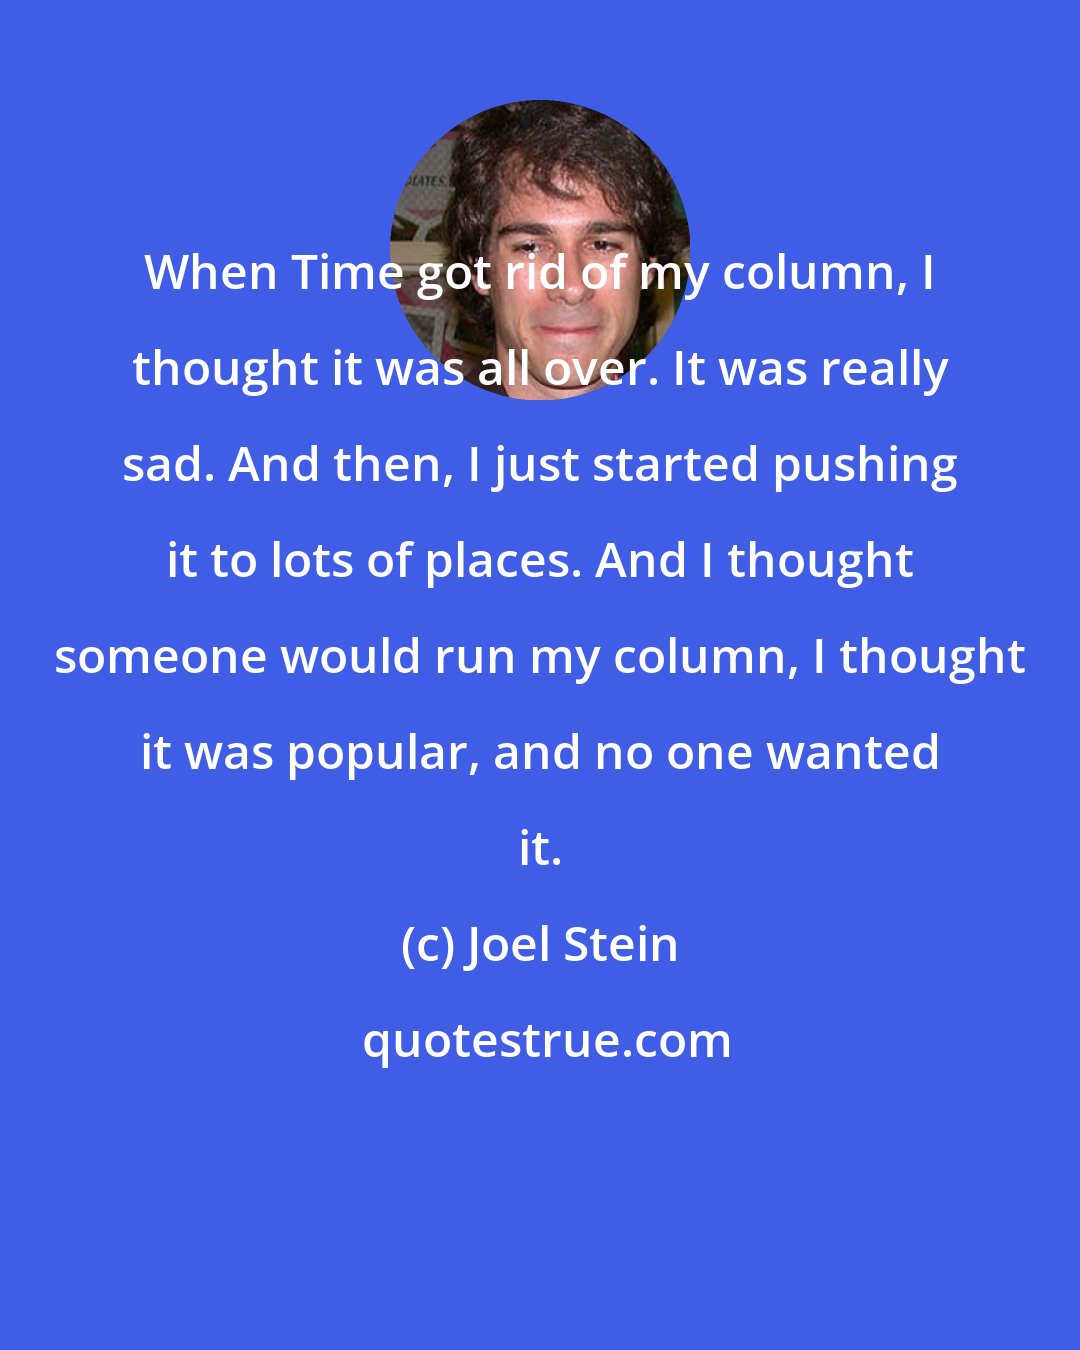 Joel Stein: When Time got rid of my column, I thought it was all over. It was really sad. And then, I just started pushing it to lots of places. And I thought someone would run my column, I thought it was popular, and no one wanted it.